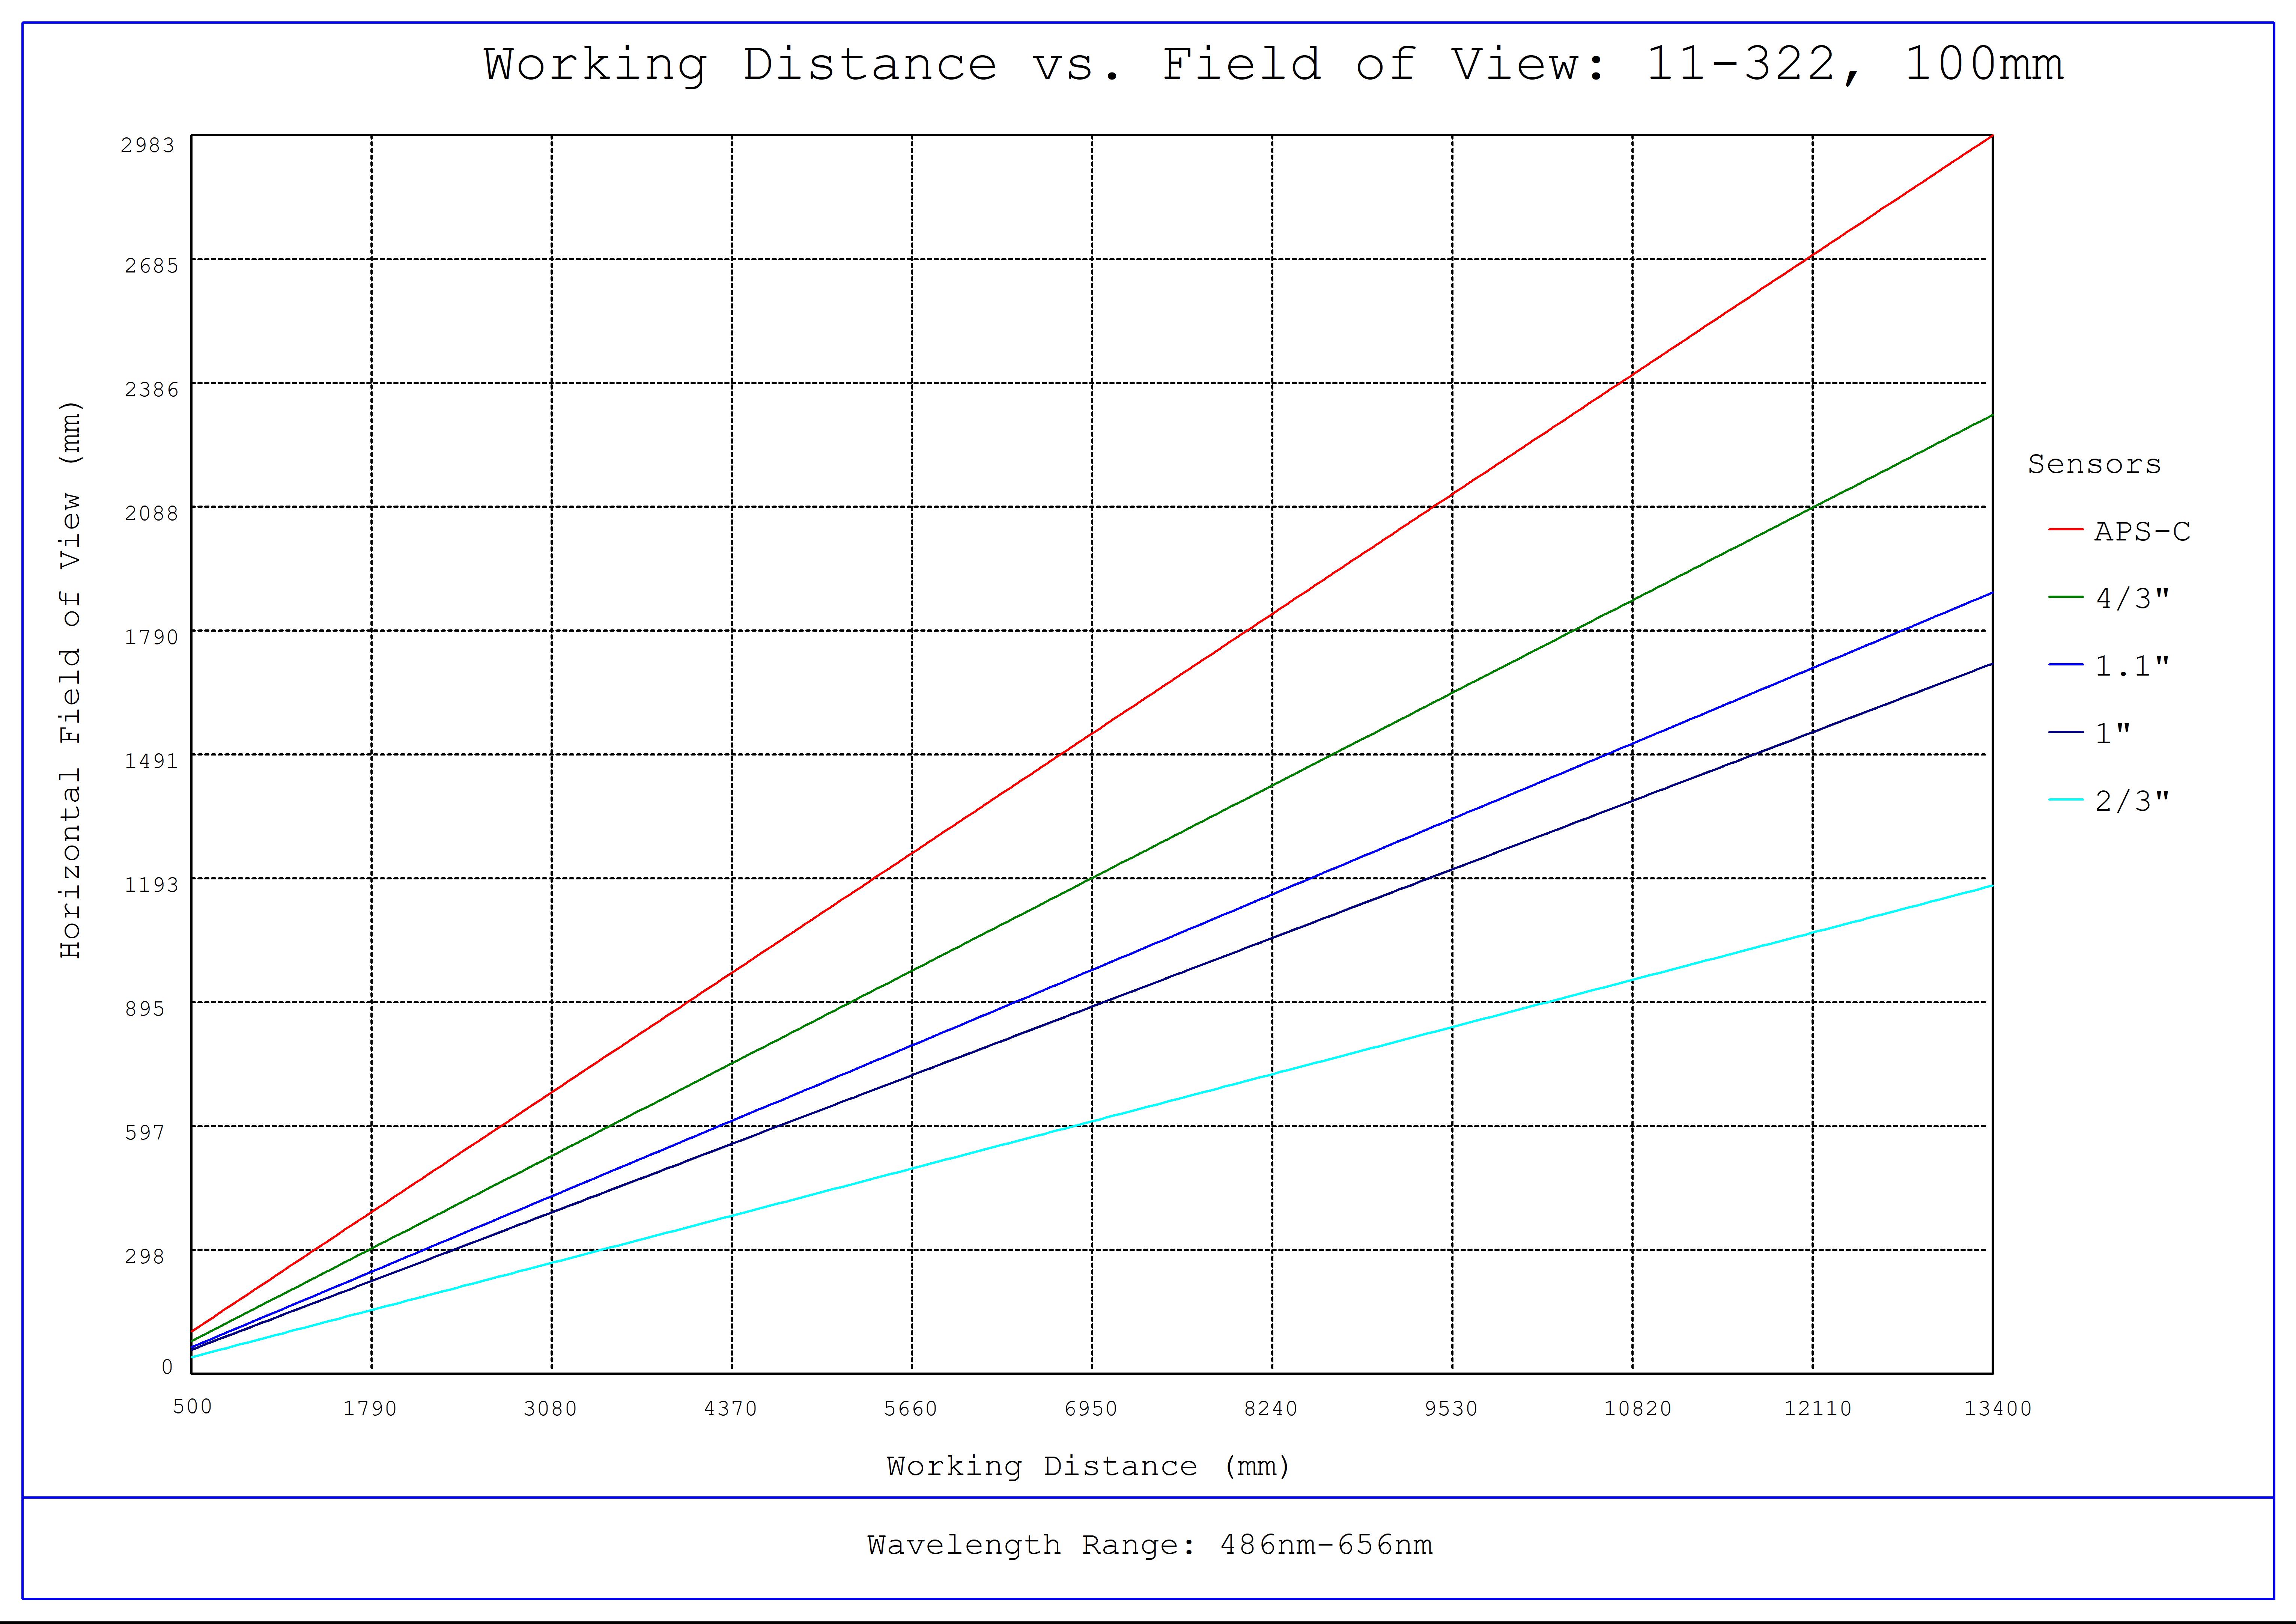 #11-322, 100mm CA Series Fixed Focal Length Lens, Working Distance versus Field of View Plot